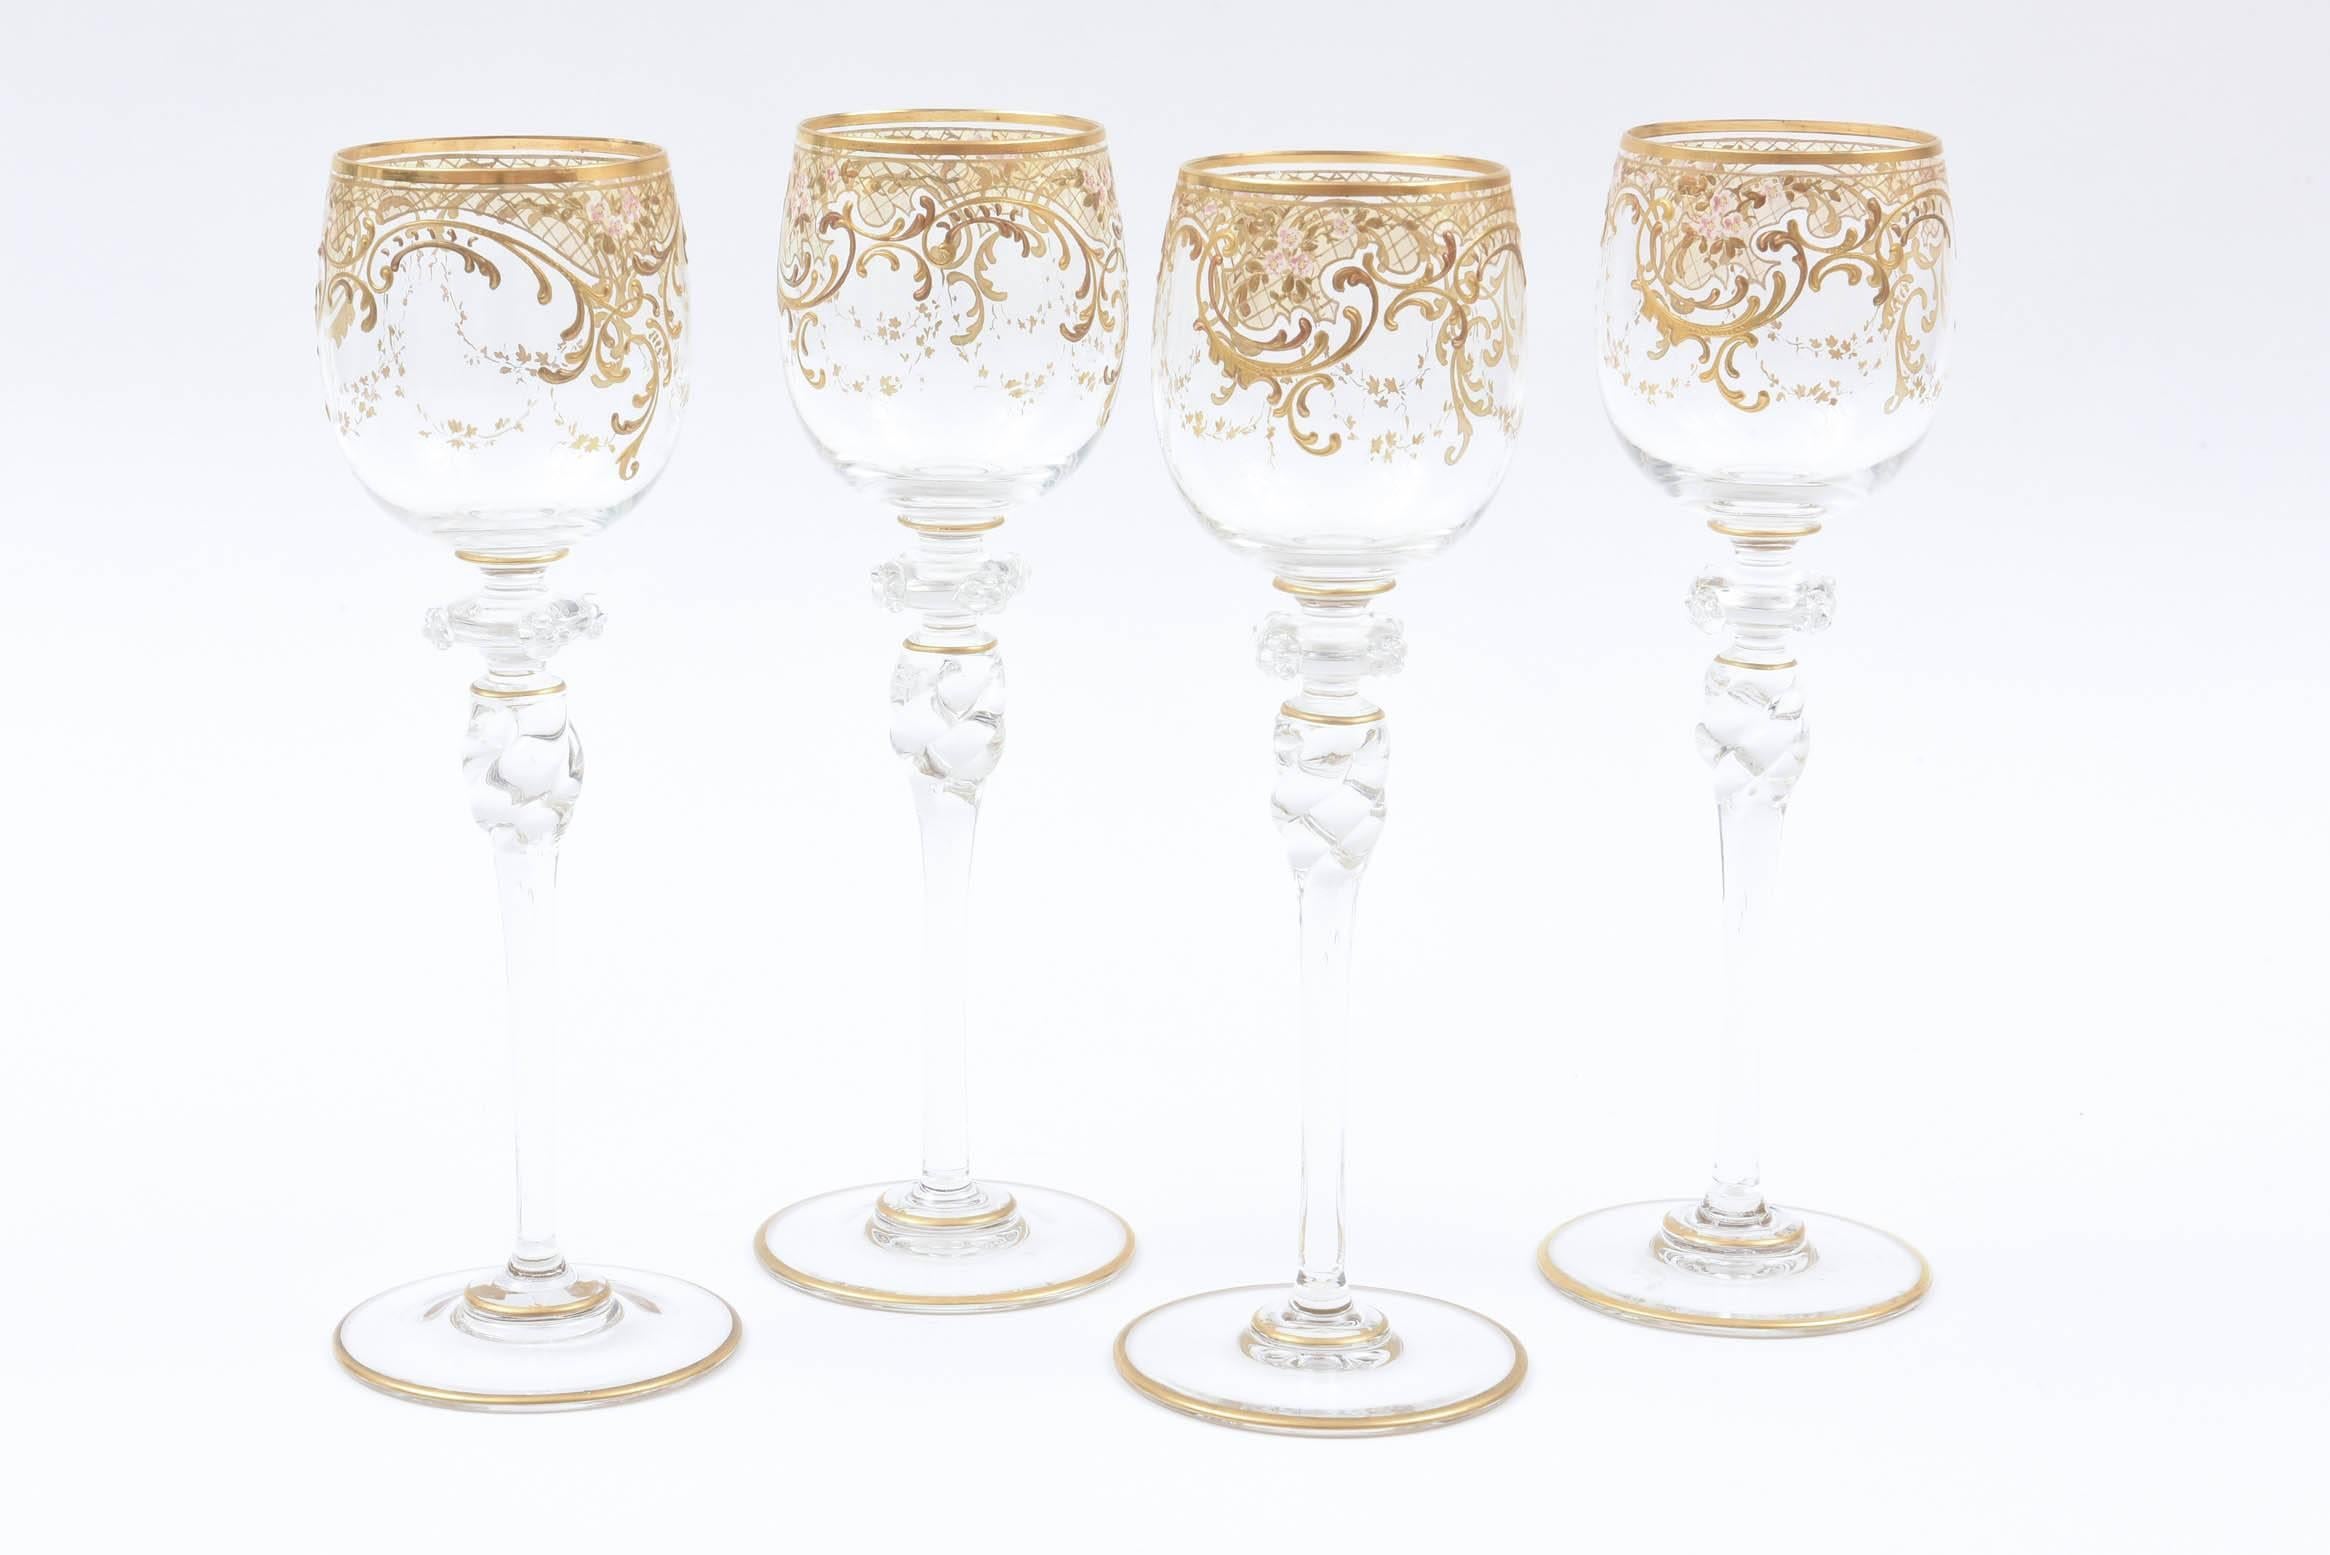 Early 20th Century Four Tall Elegant Antique Moser Wine Goblets, Raised Gold & Hand-Painted Florals